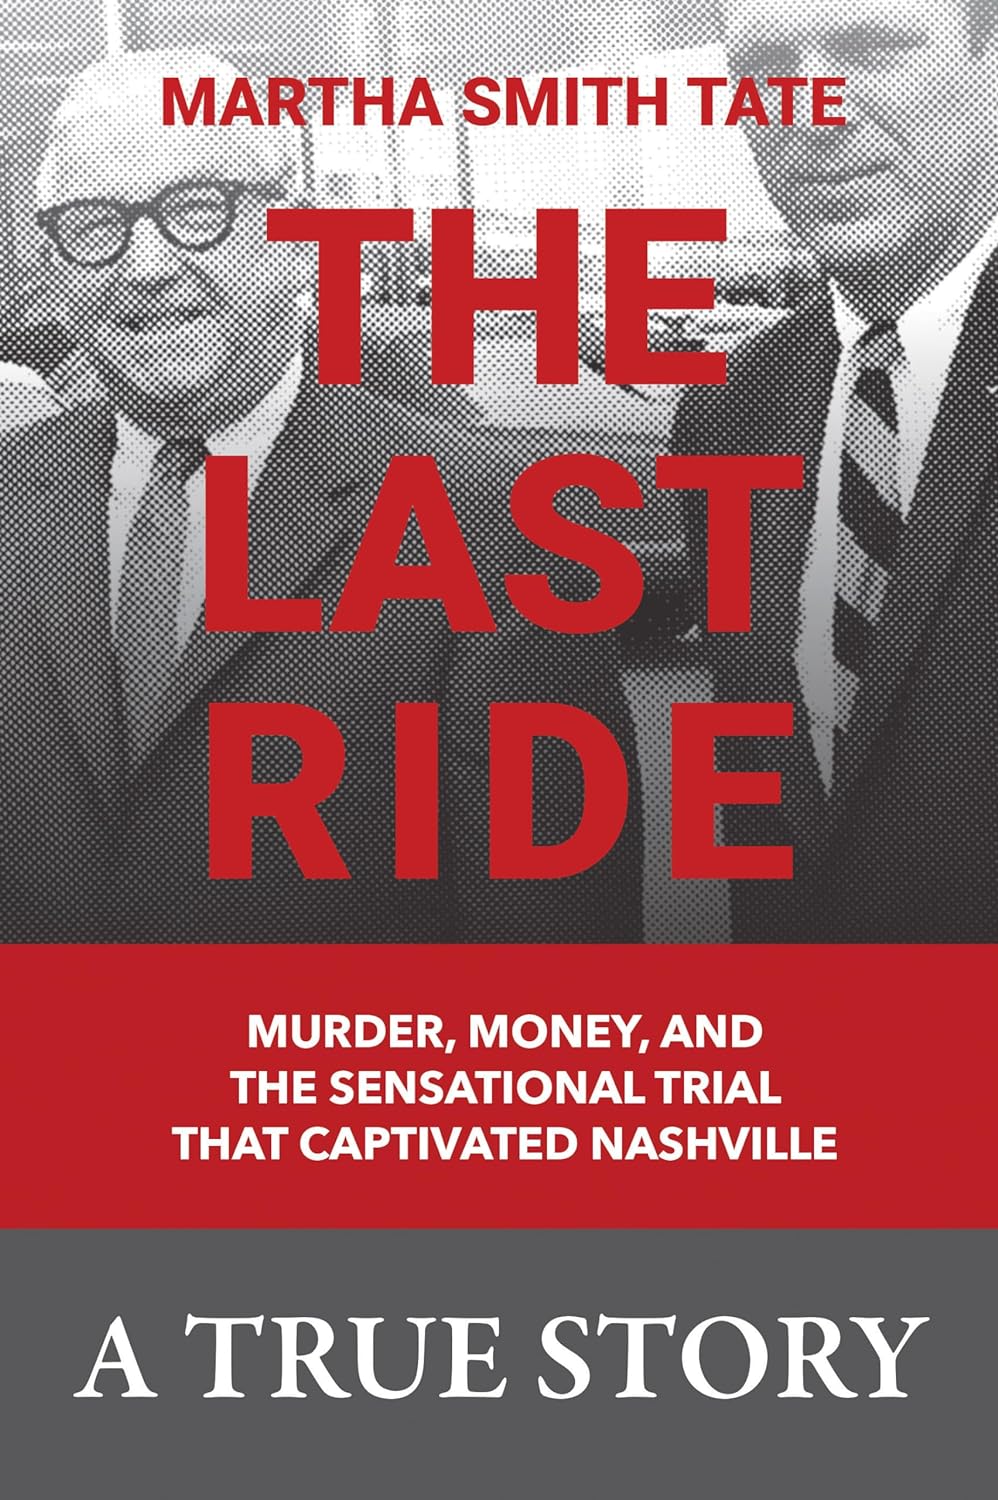 The Last Ride By Martha Tate